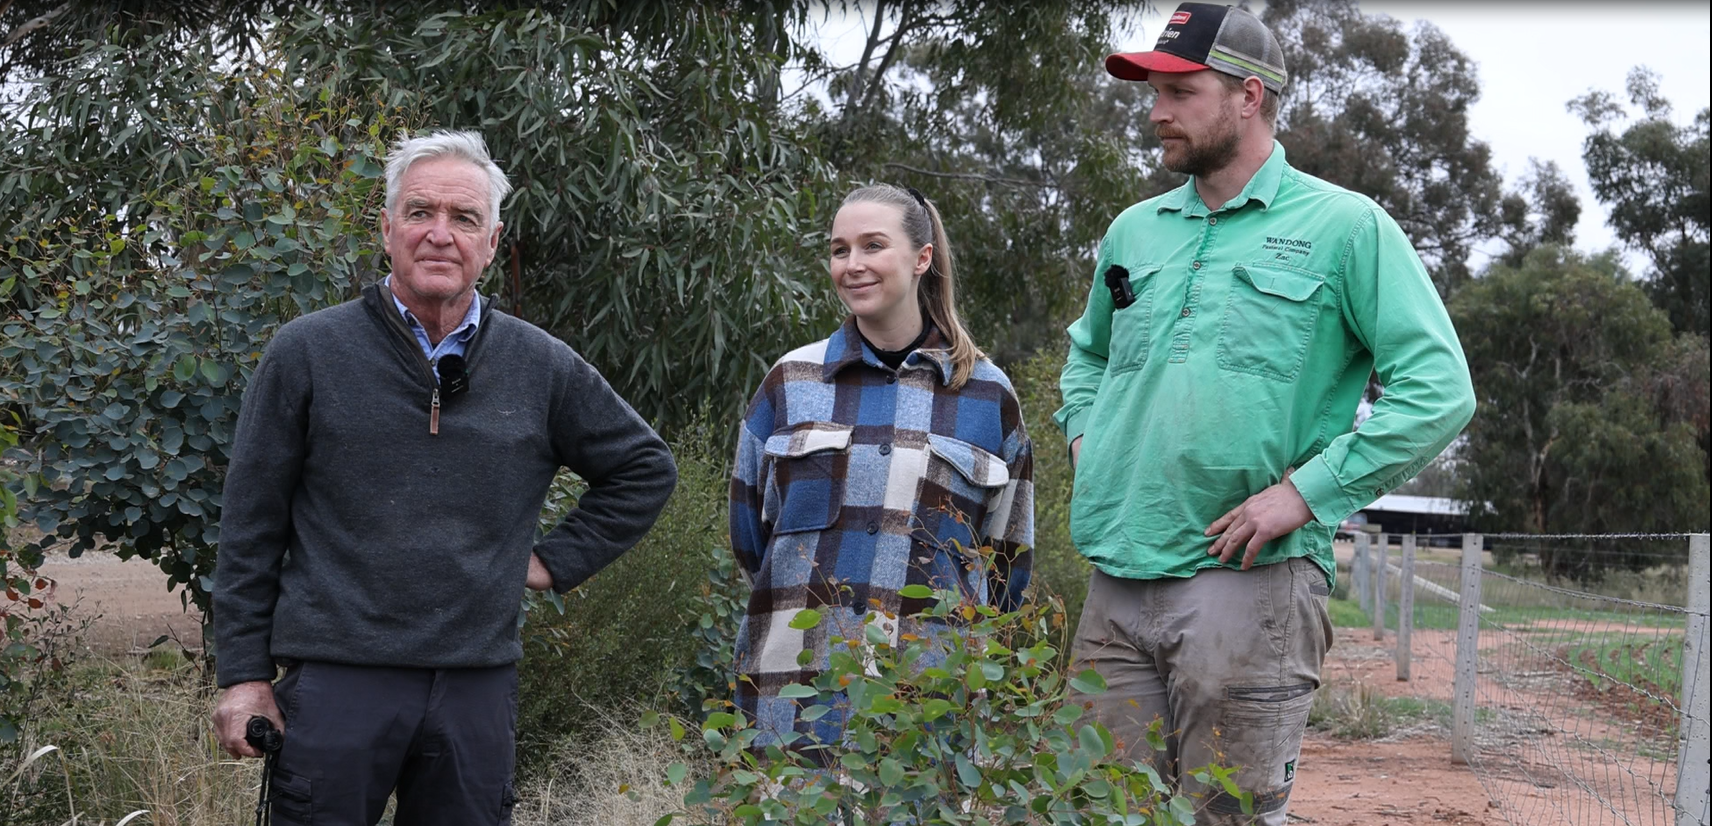 A grey haired man on the left, a lady in a blue checkered shirt in the middle and a man with a green collared shirt on the right, all standing behind a newly planted tree